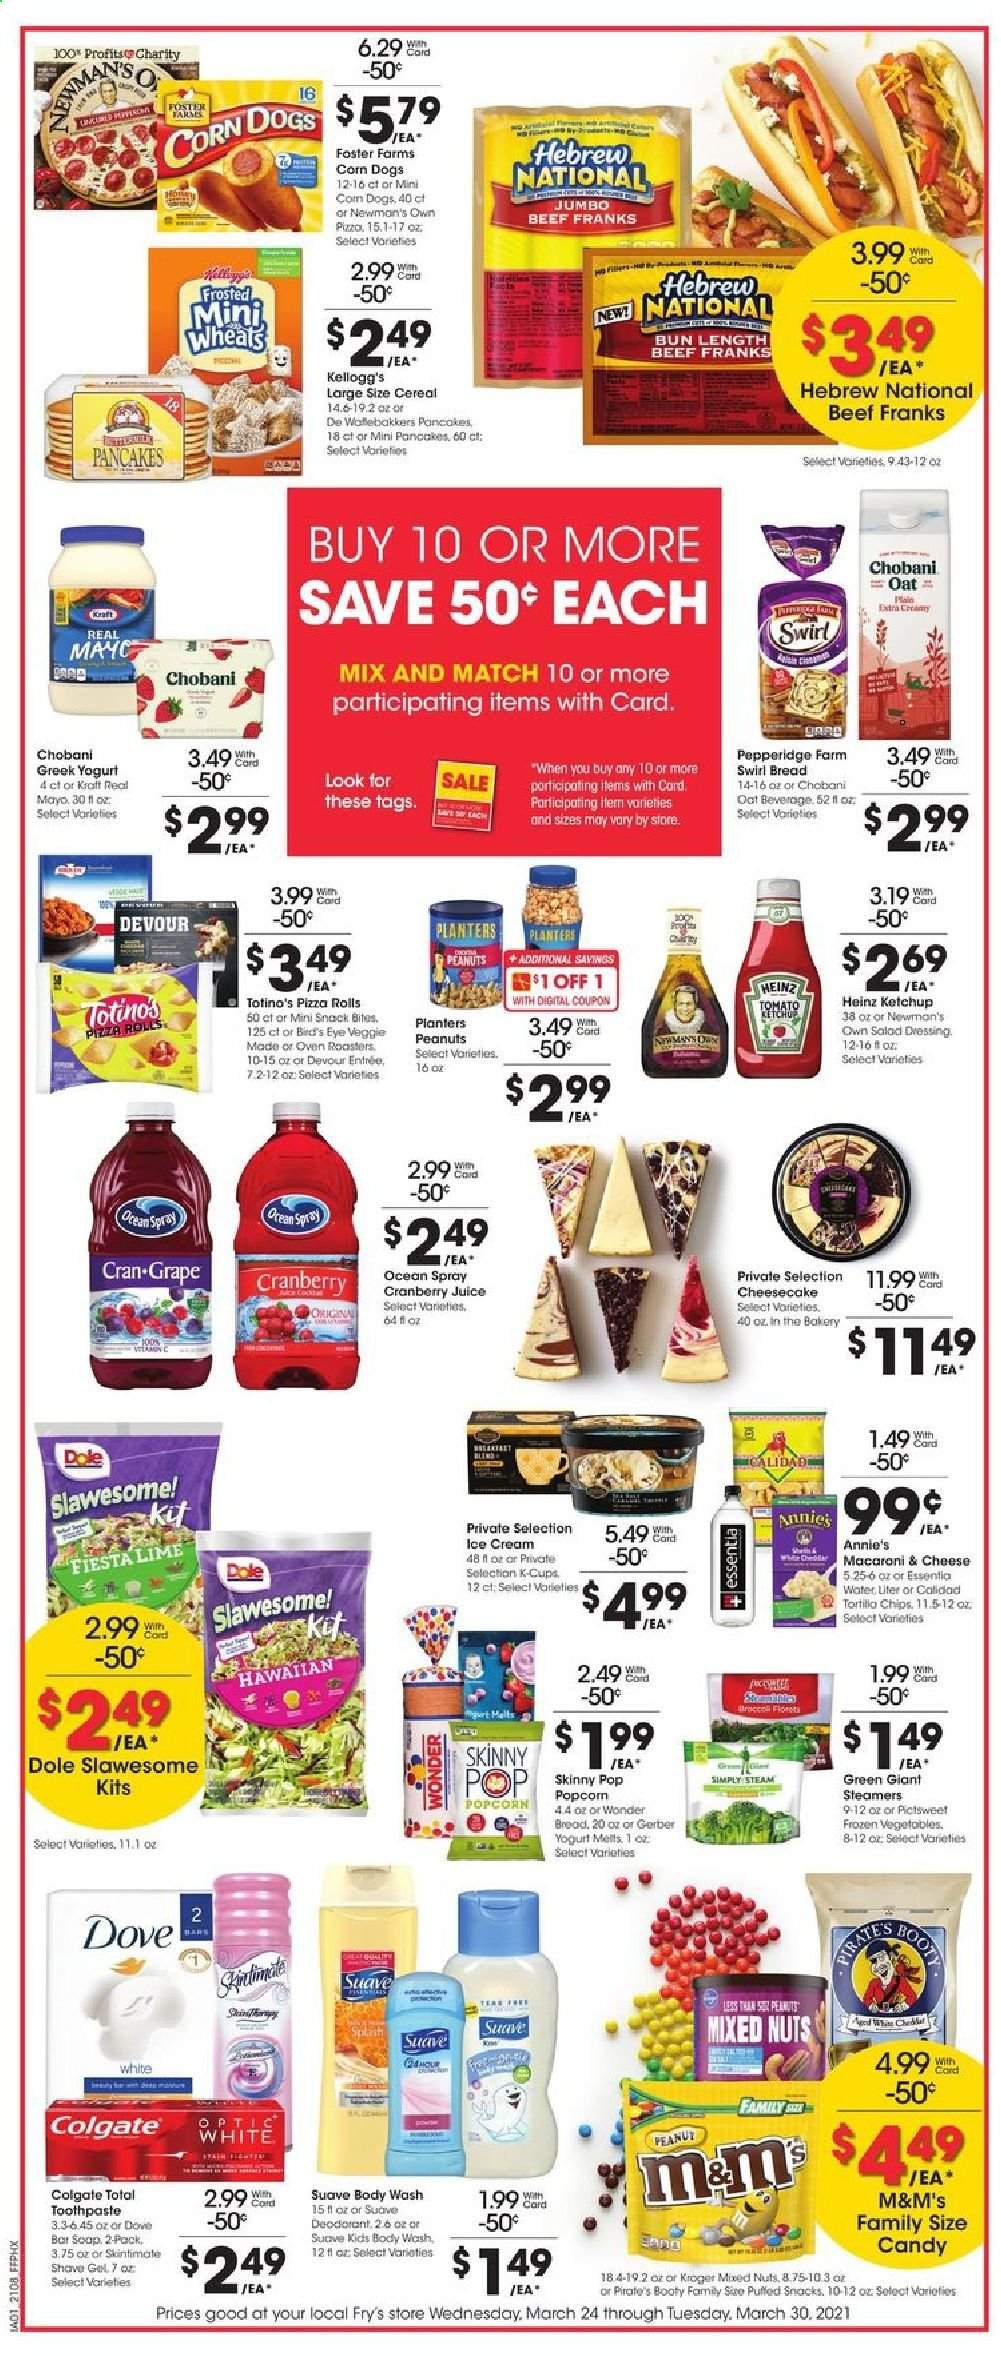 thumbnail - Fry’s Flyer - 03/24/2021 - 03/30/2021 - Sales products - Dole, bread, pizza rolls, cheesecake, pancakes, macaroni & cheese, pizza, Bird's Eye, Annie's, Kraft®, greek yoghurt, yoghurt, Chobani, mayonnaise, ice cream, corn, frozen vegetables, Devour, M&M's, Kellogg's, Gerber, snack, popcorn, Skinny Pop, oats, Heinz, cereals, salad dressing, ketchup, dressing, peanuts, mixed nuts, Planters, cranberry juice, juice, Cran-Grape, coffee capsules, K-Cups, Dove, body wash, Suave, soap bar, soap, Colgate, toothpaste, anti-perspirant, deodorant, shave gel, oven. Page 3.